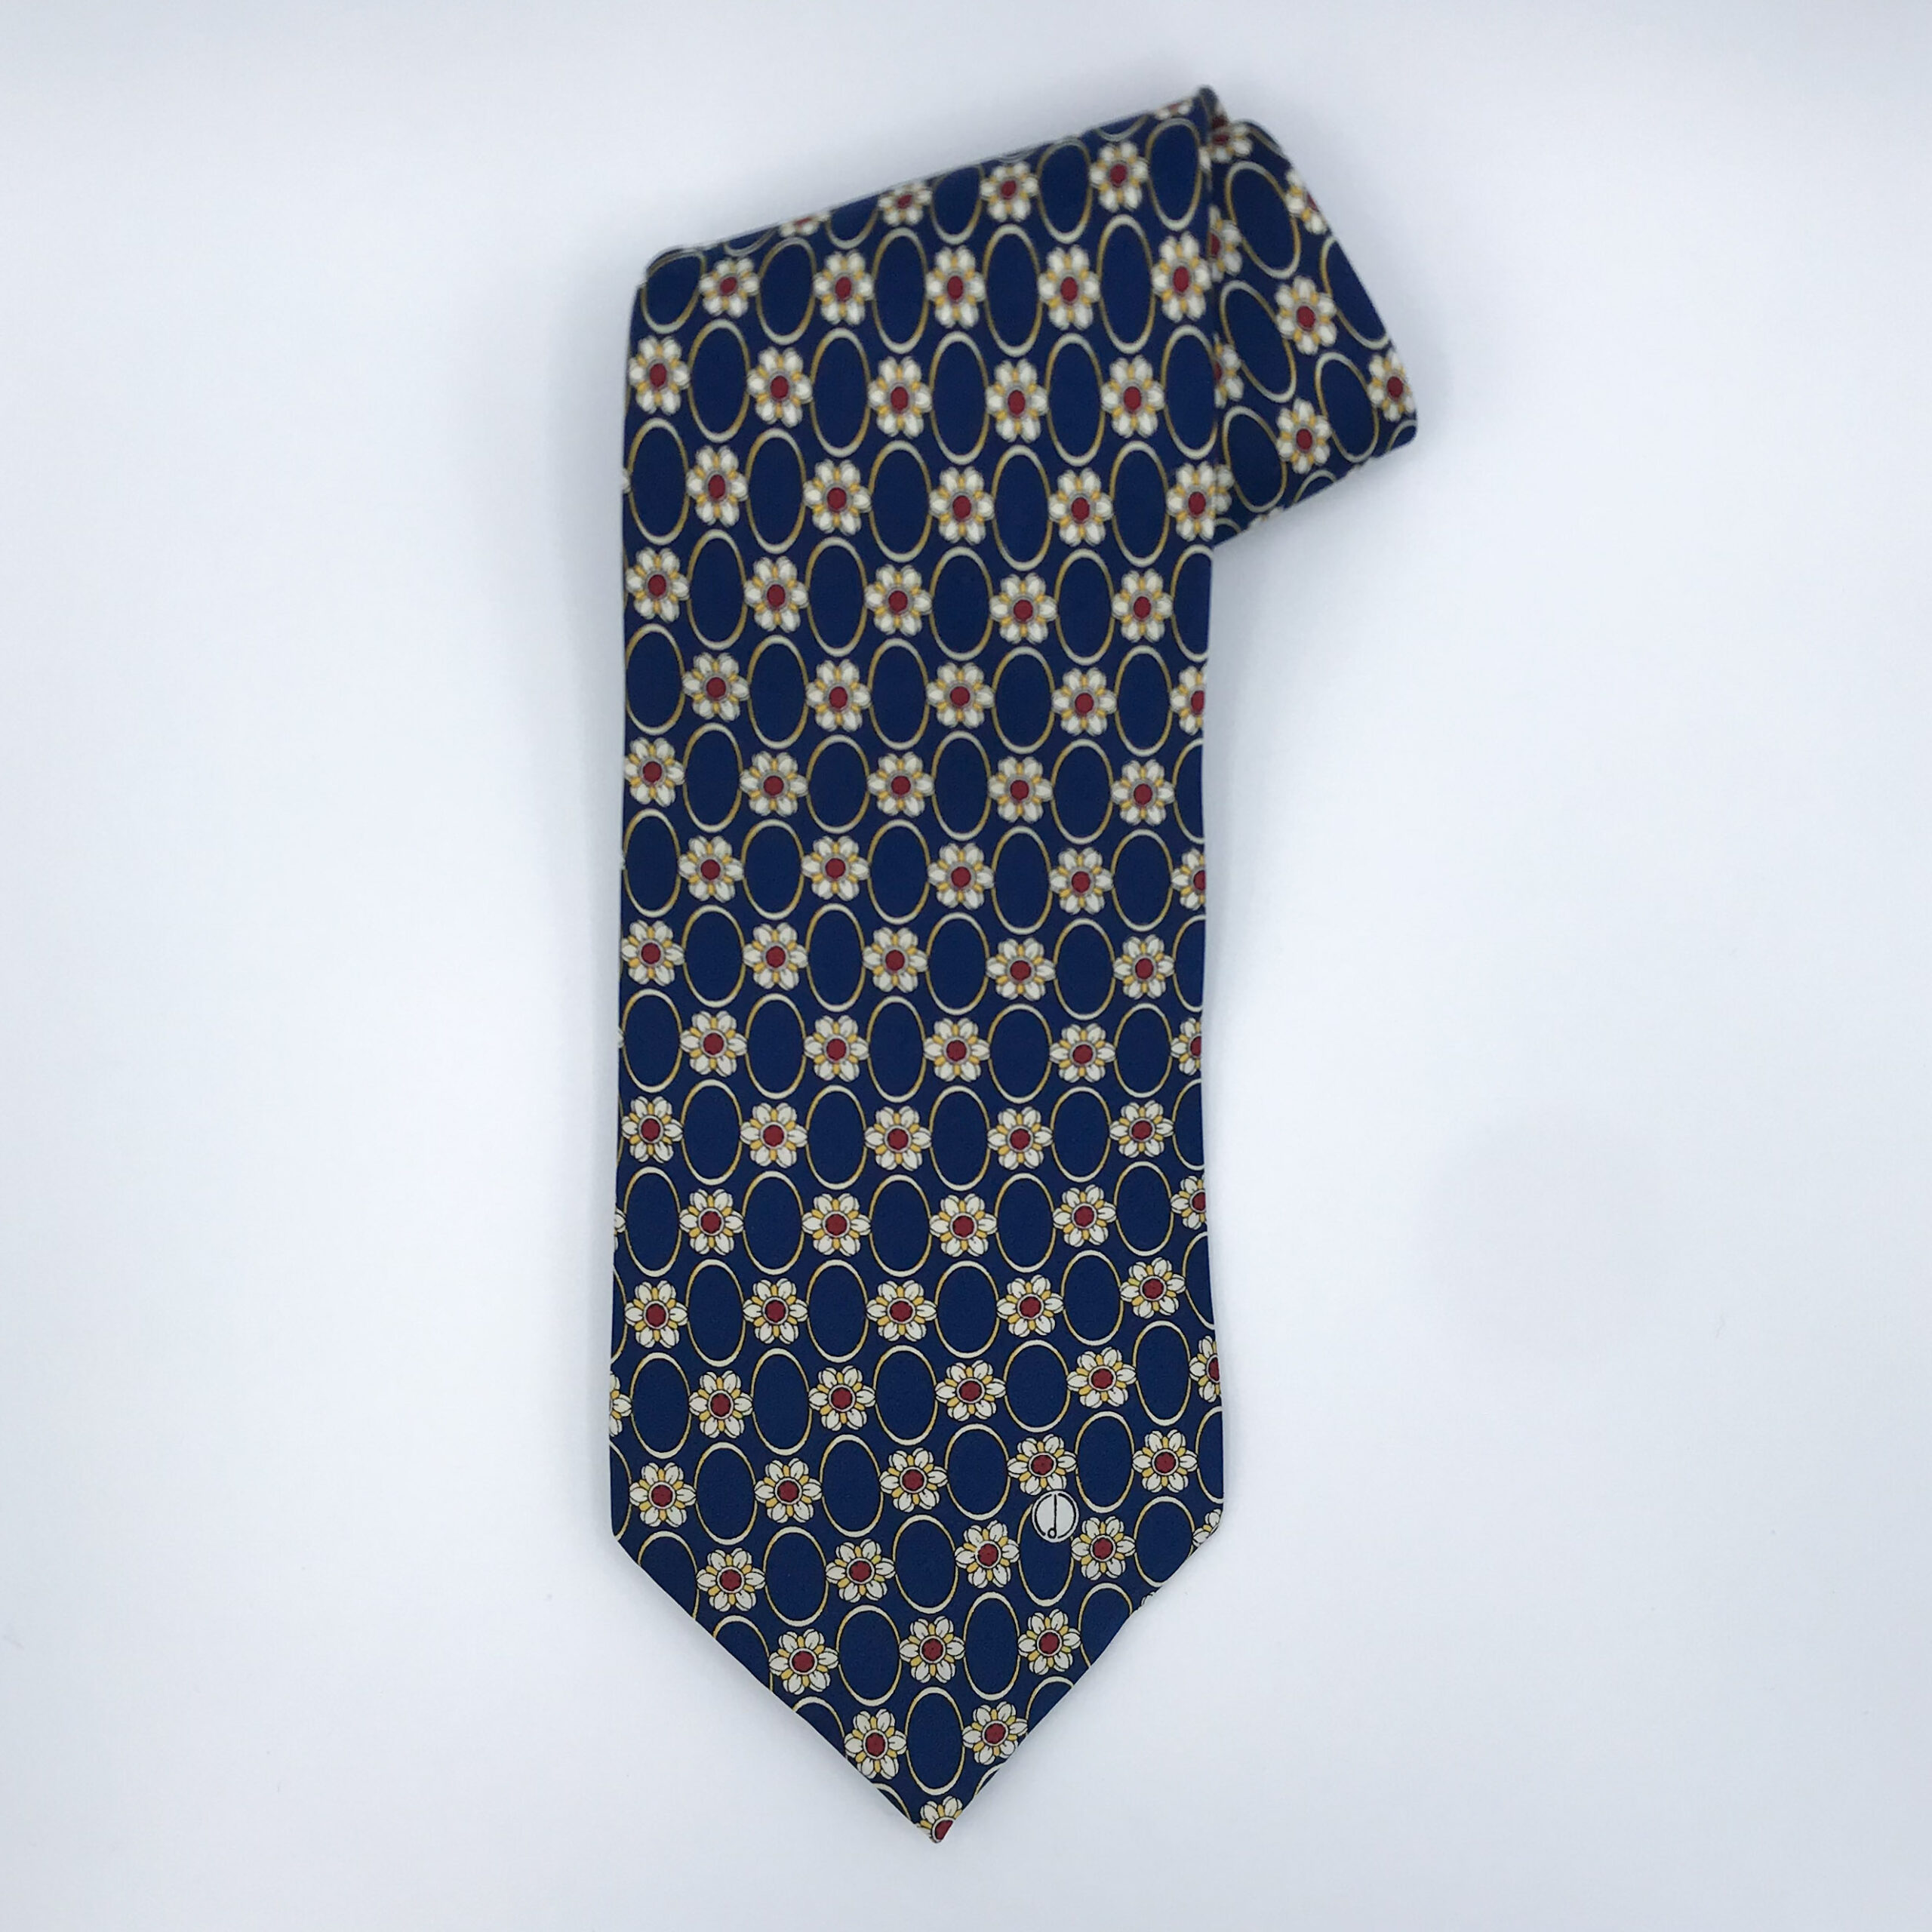 Alfred Dunhill Floral Tie